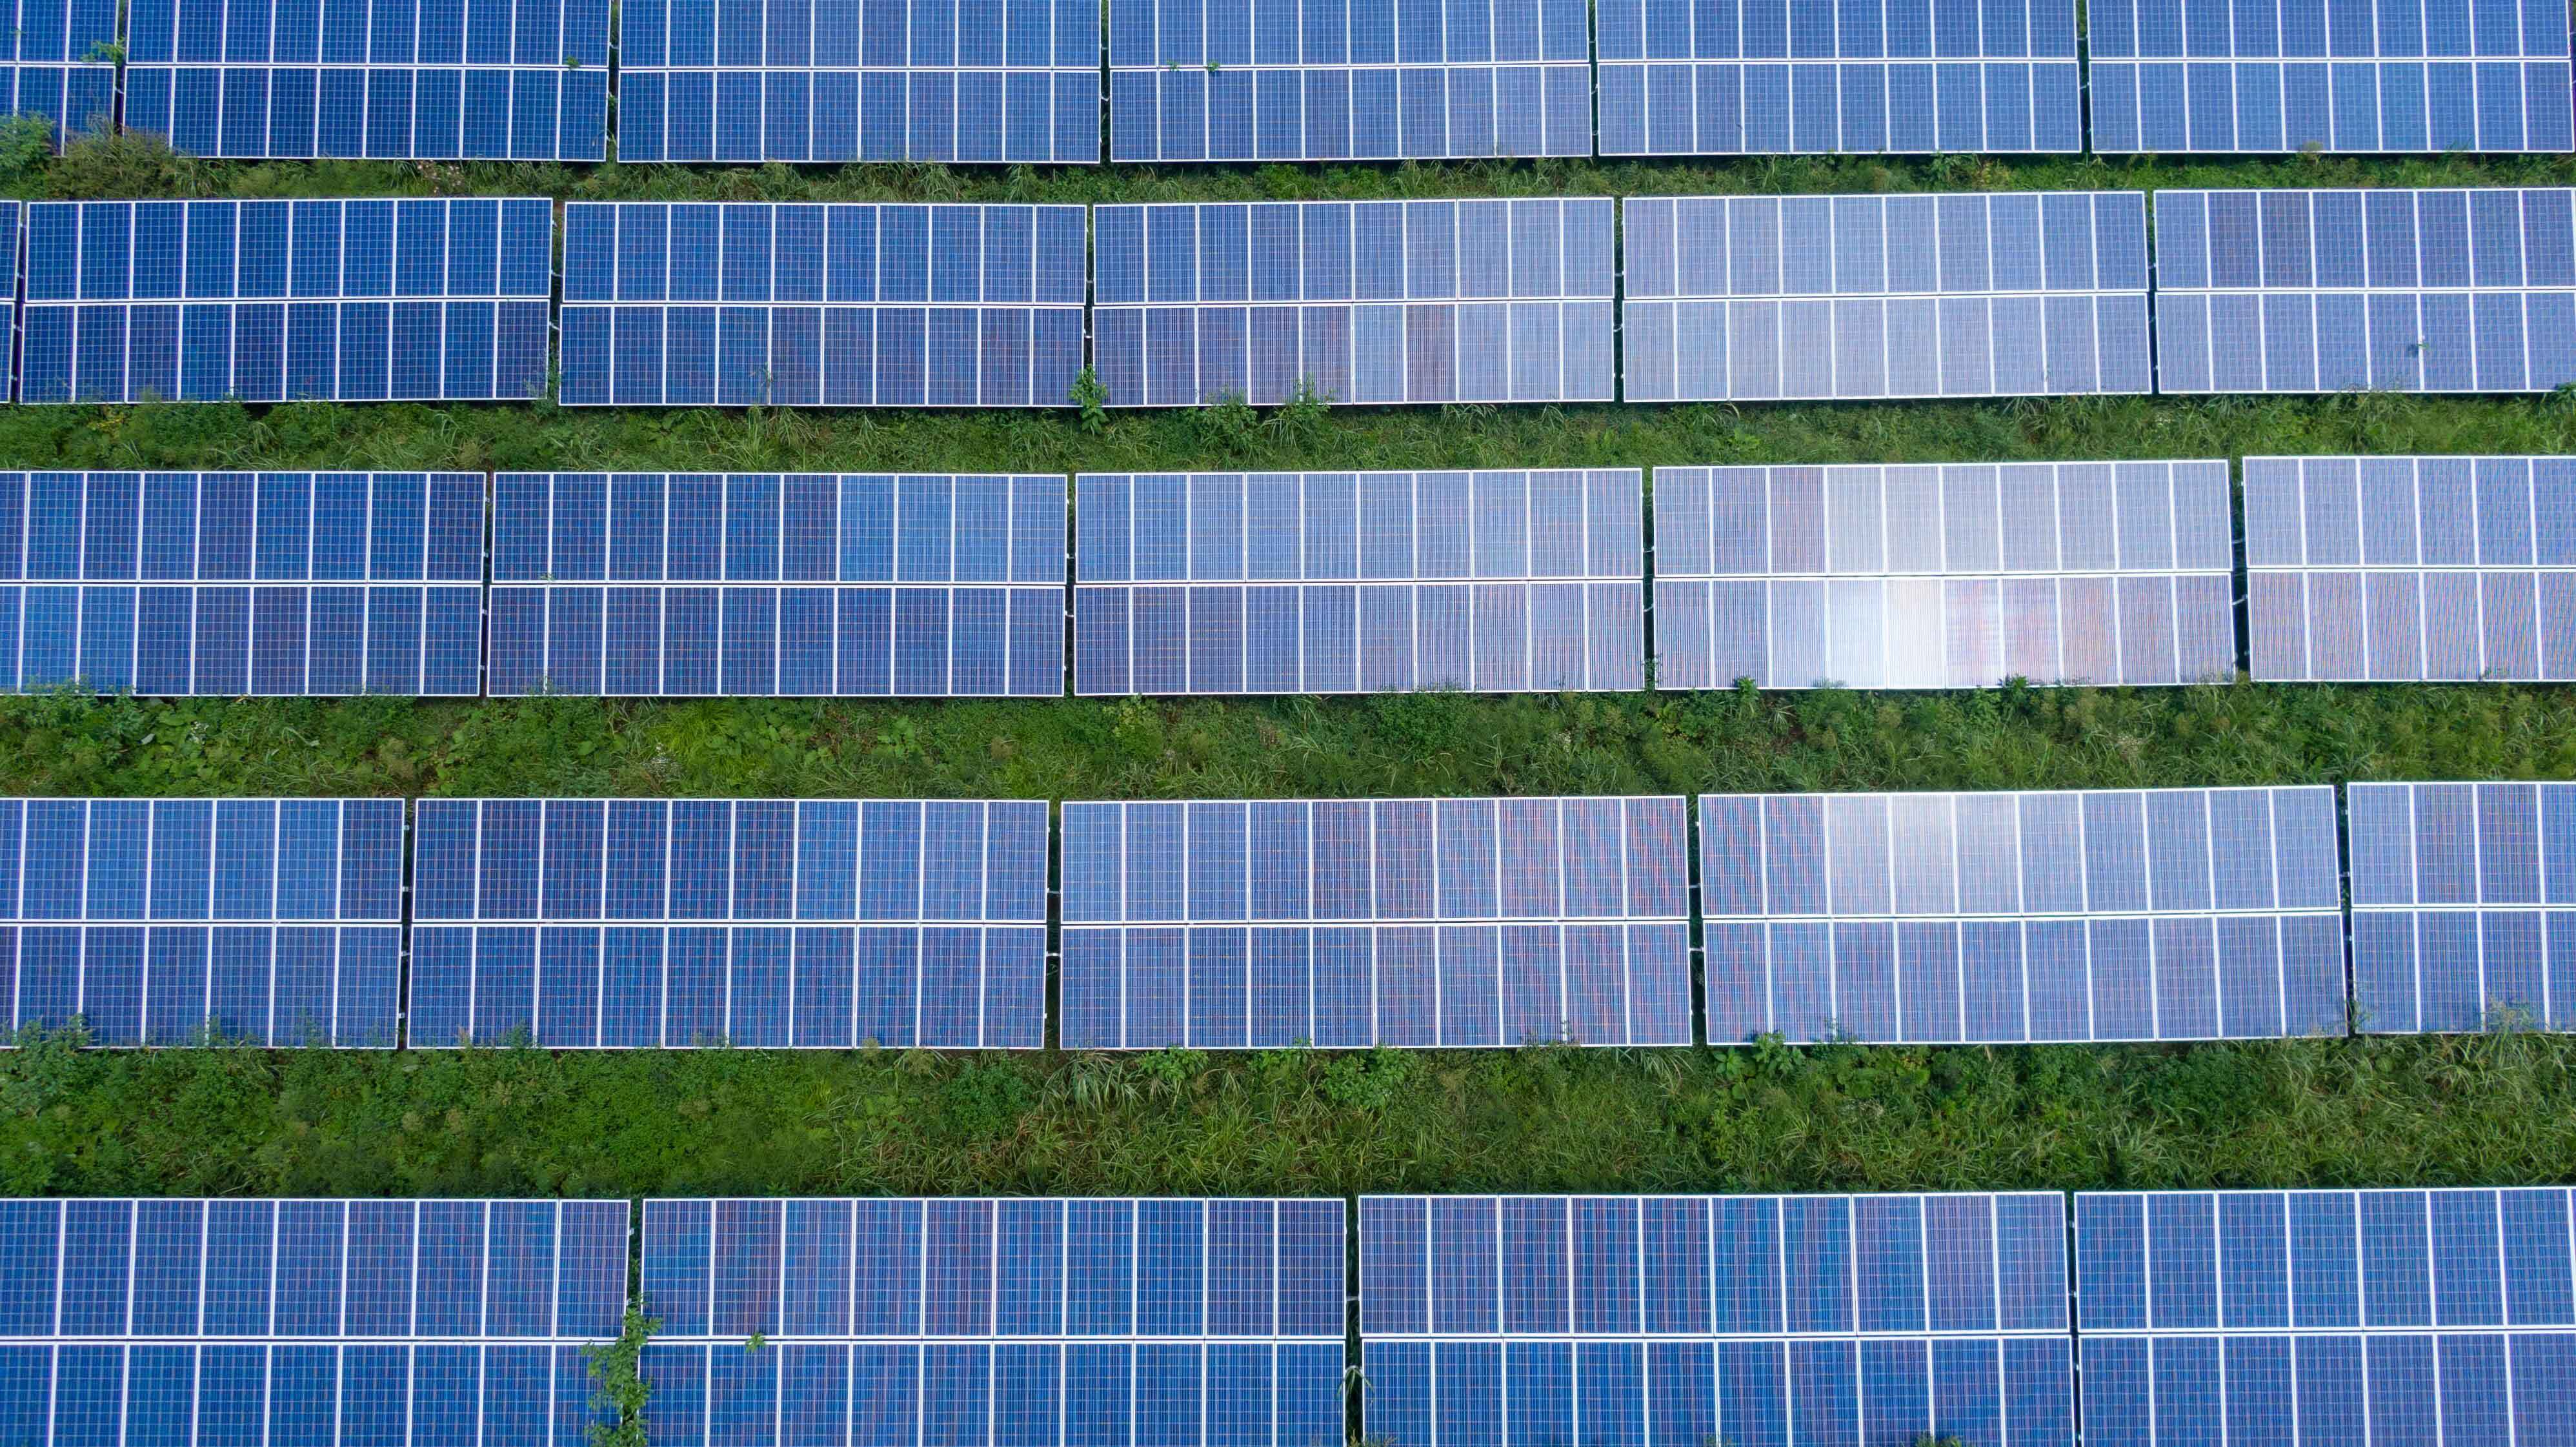 Aerial view of solar panels on grass.